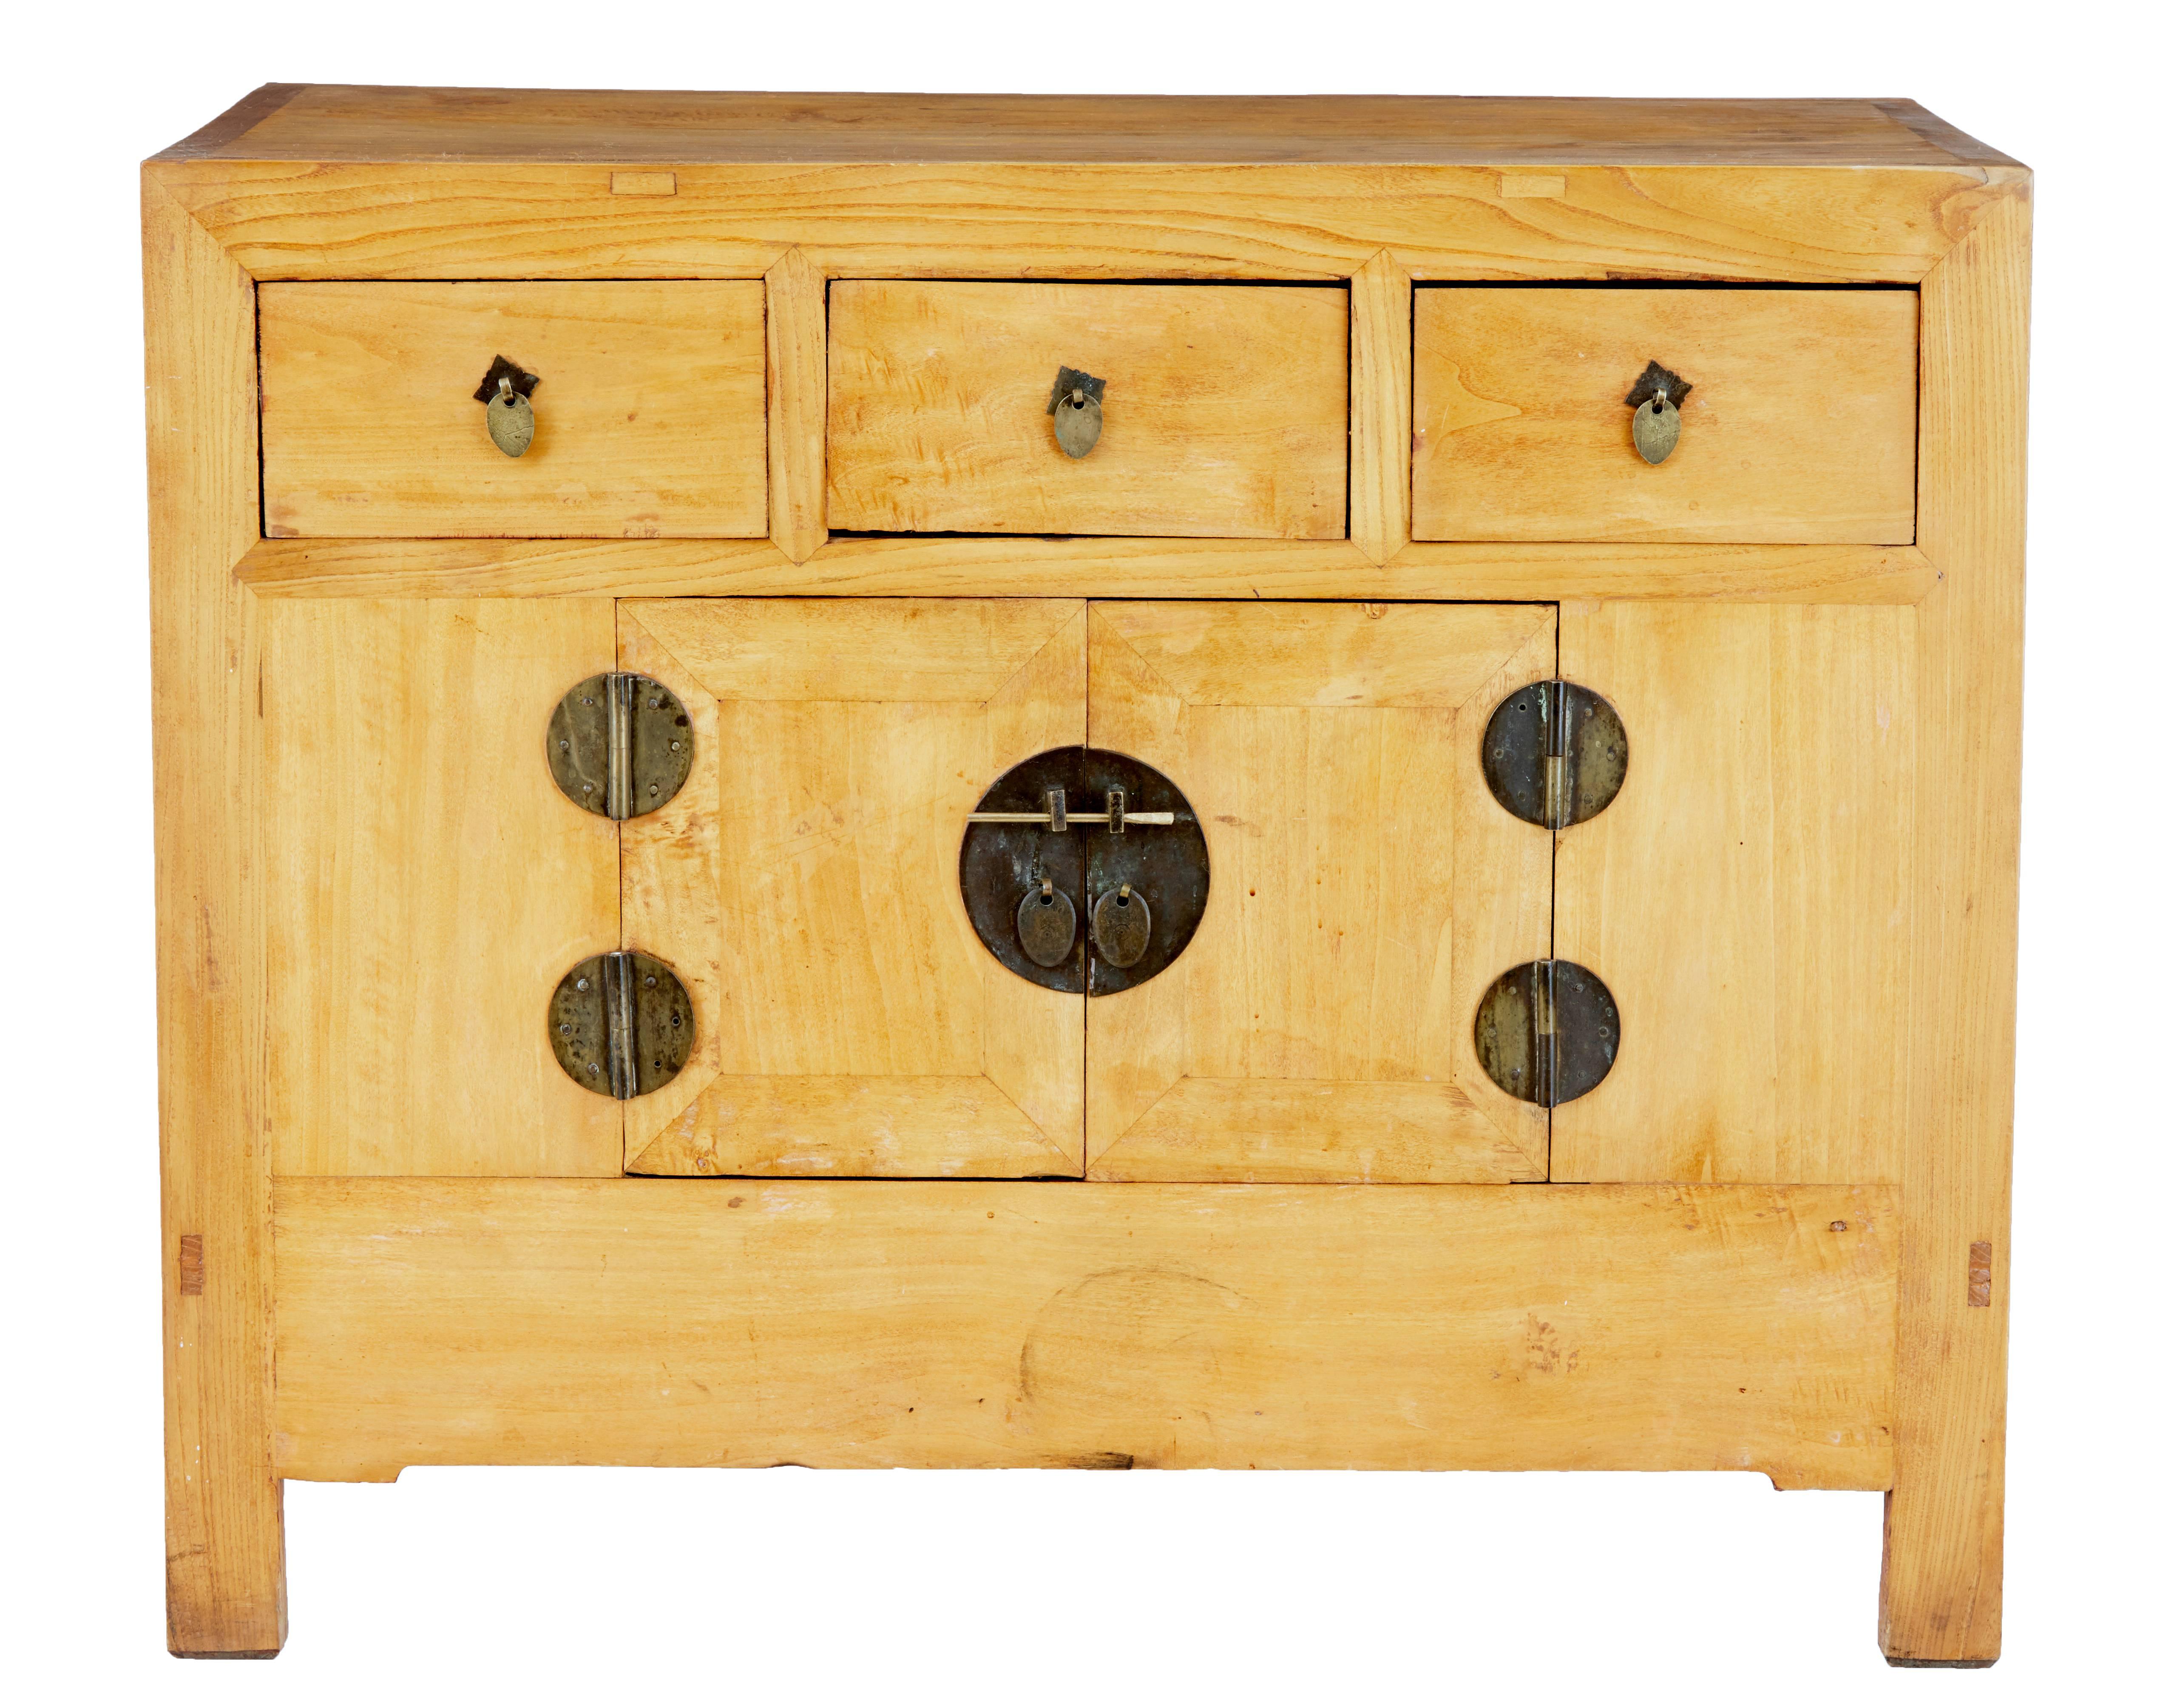 Functional piece of Chinese export furniture, circa 1890.

Made from oriental softwood, with three drawers below the top surface and a double door cupboard below. Original hardware. Displaying evidence from the interior to have been previously red